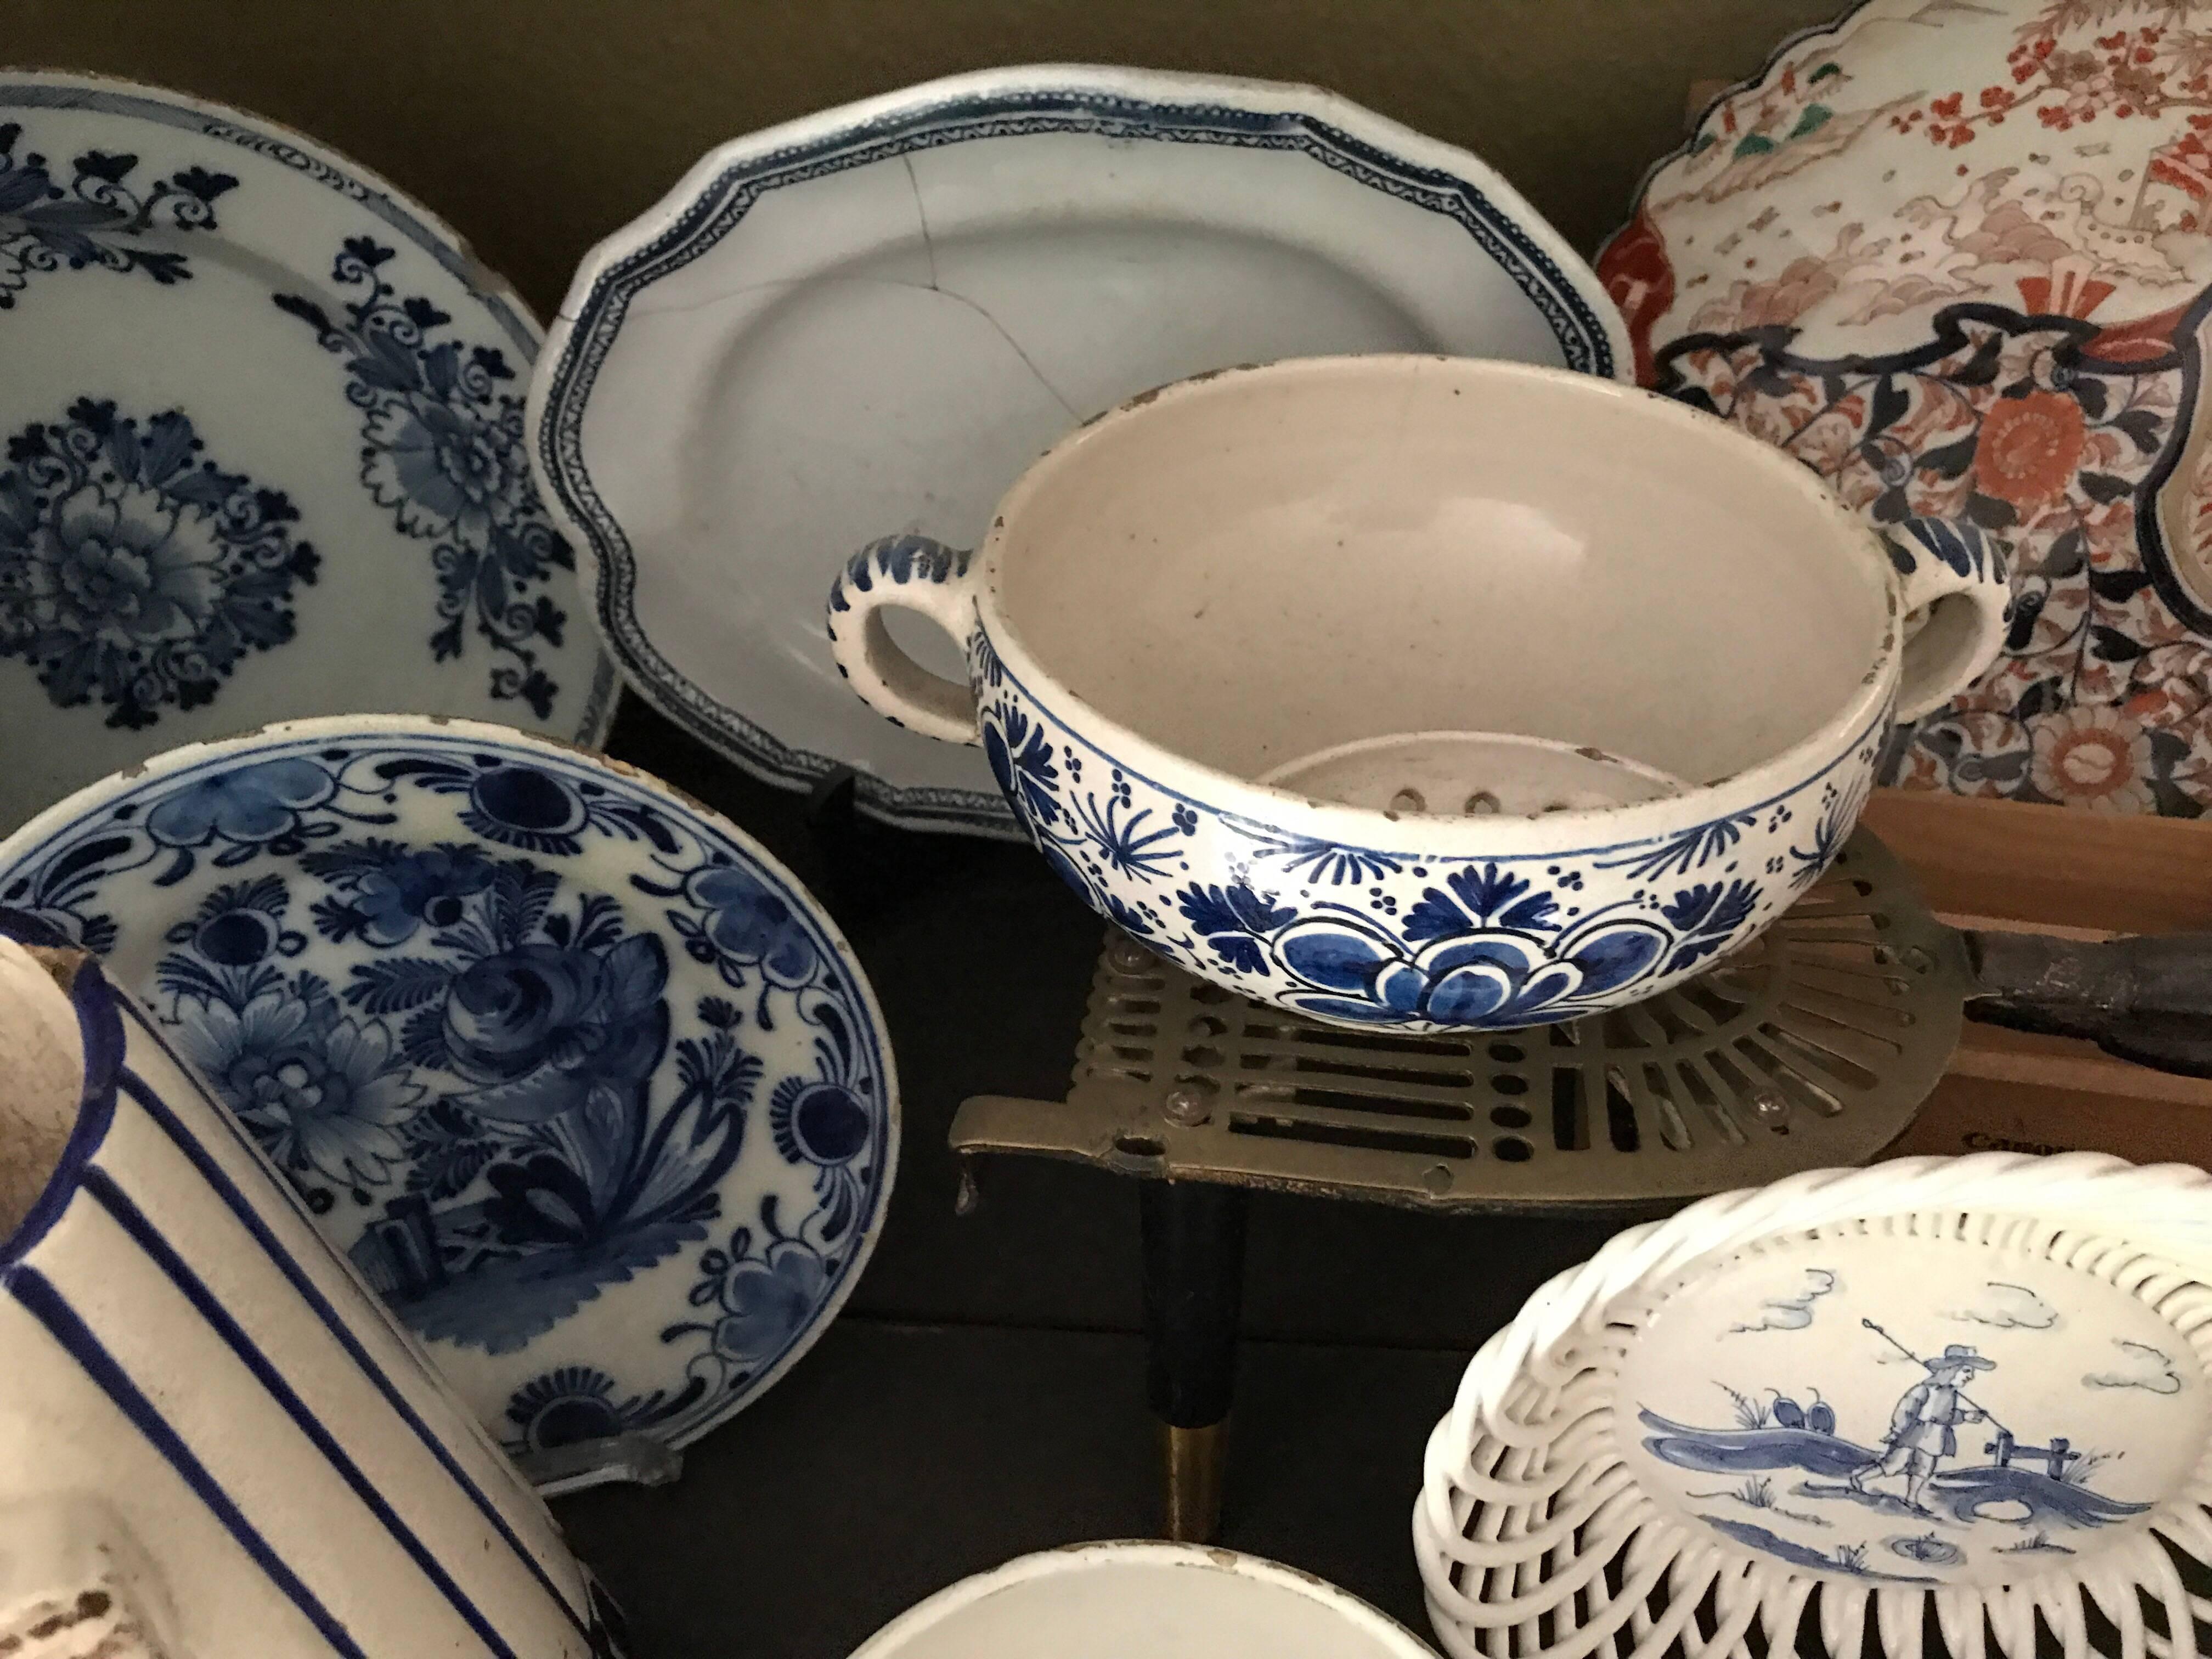 Exclusive collection of 17th-early 19th century blue faience items of different origin
17 peaces 
Delft Dutch, Portuguese,spanish majolica , Flemish, French blue faience
Pricing is very competitive and ideal to sell the items single
More explanation